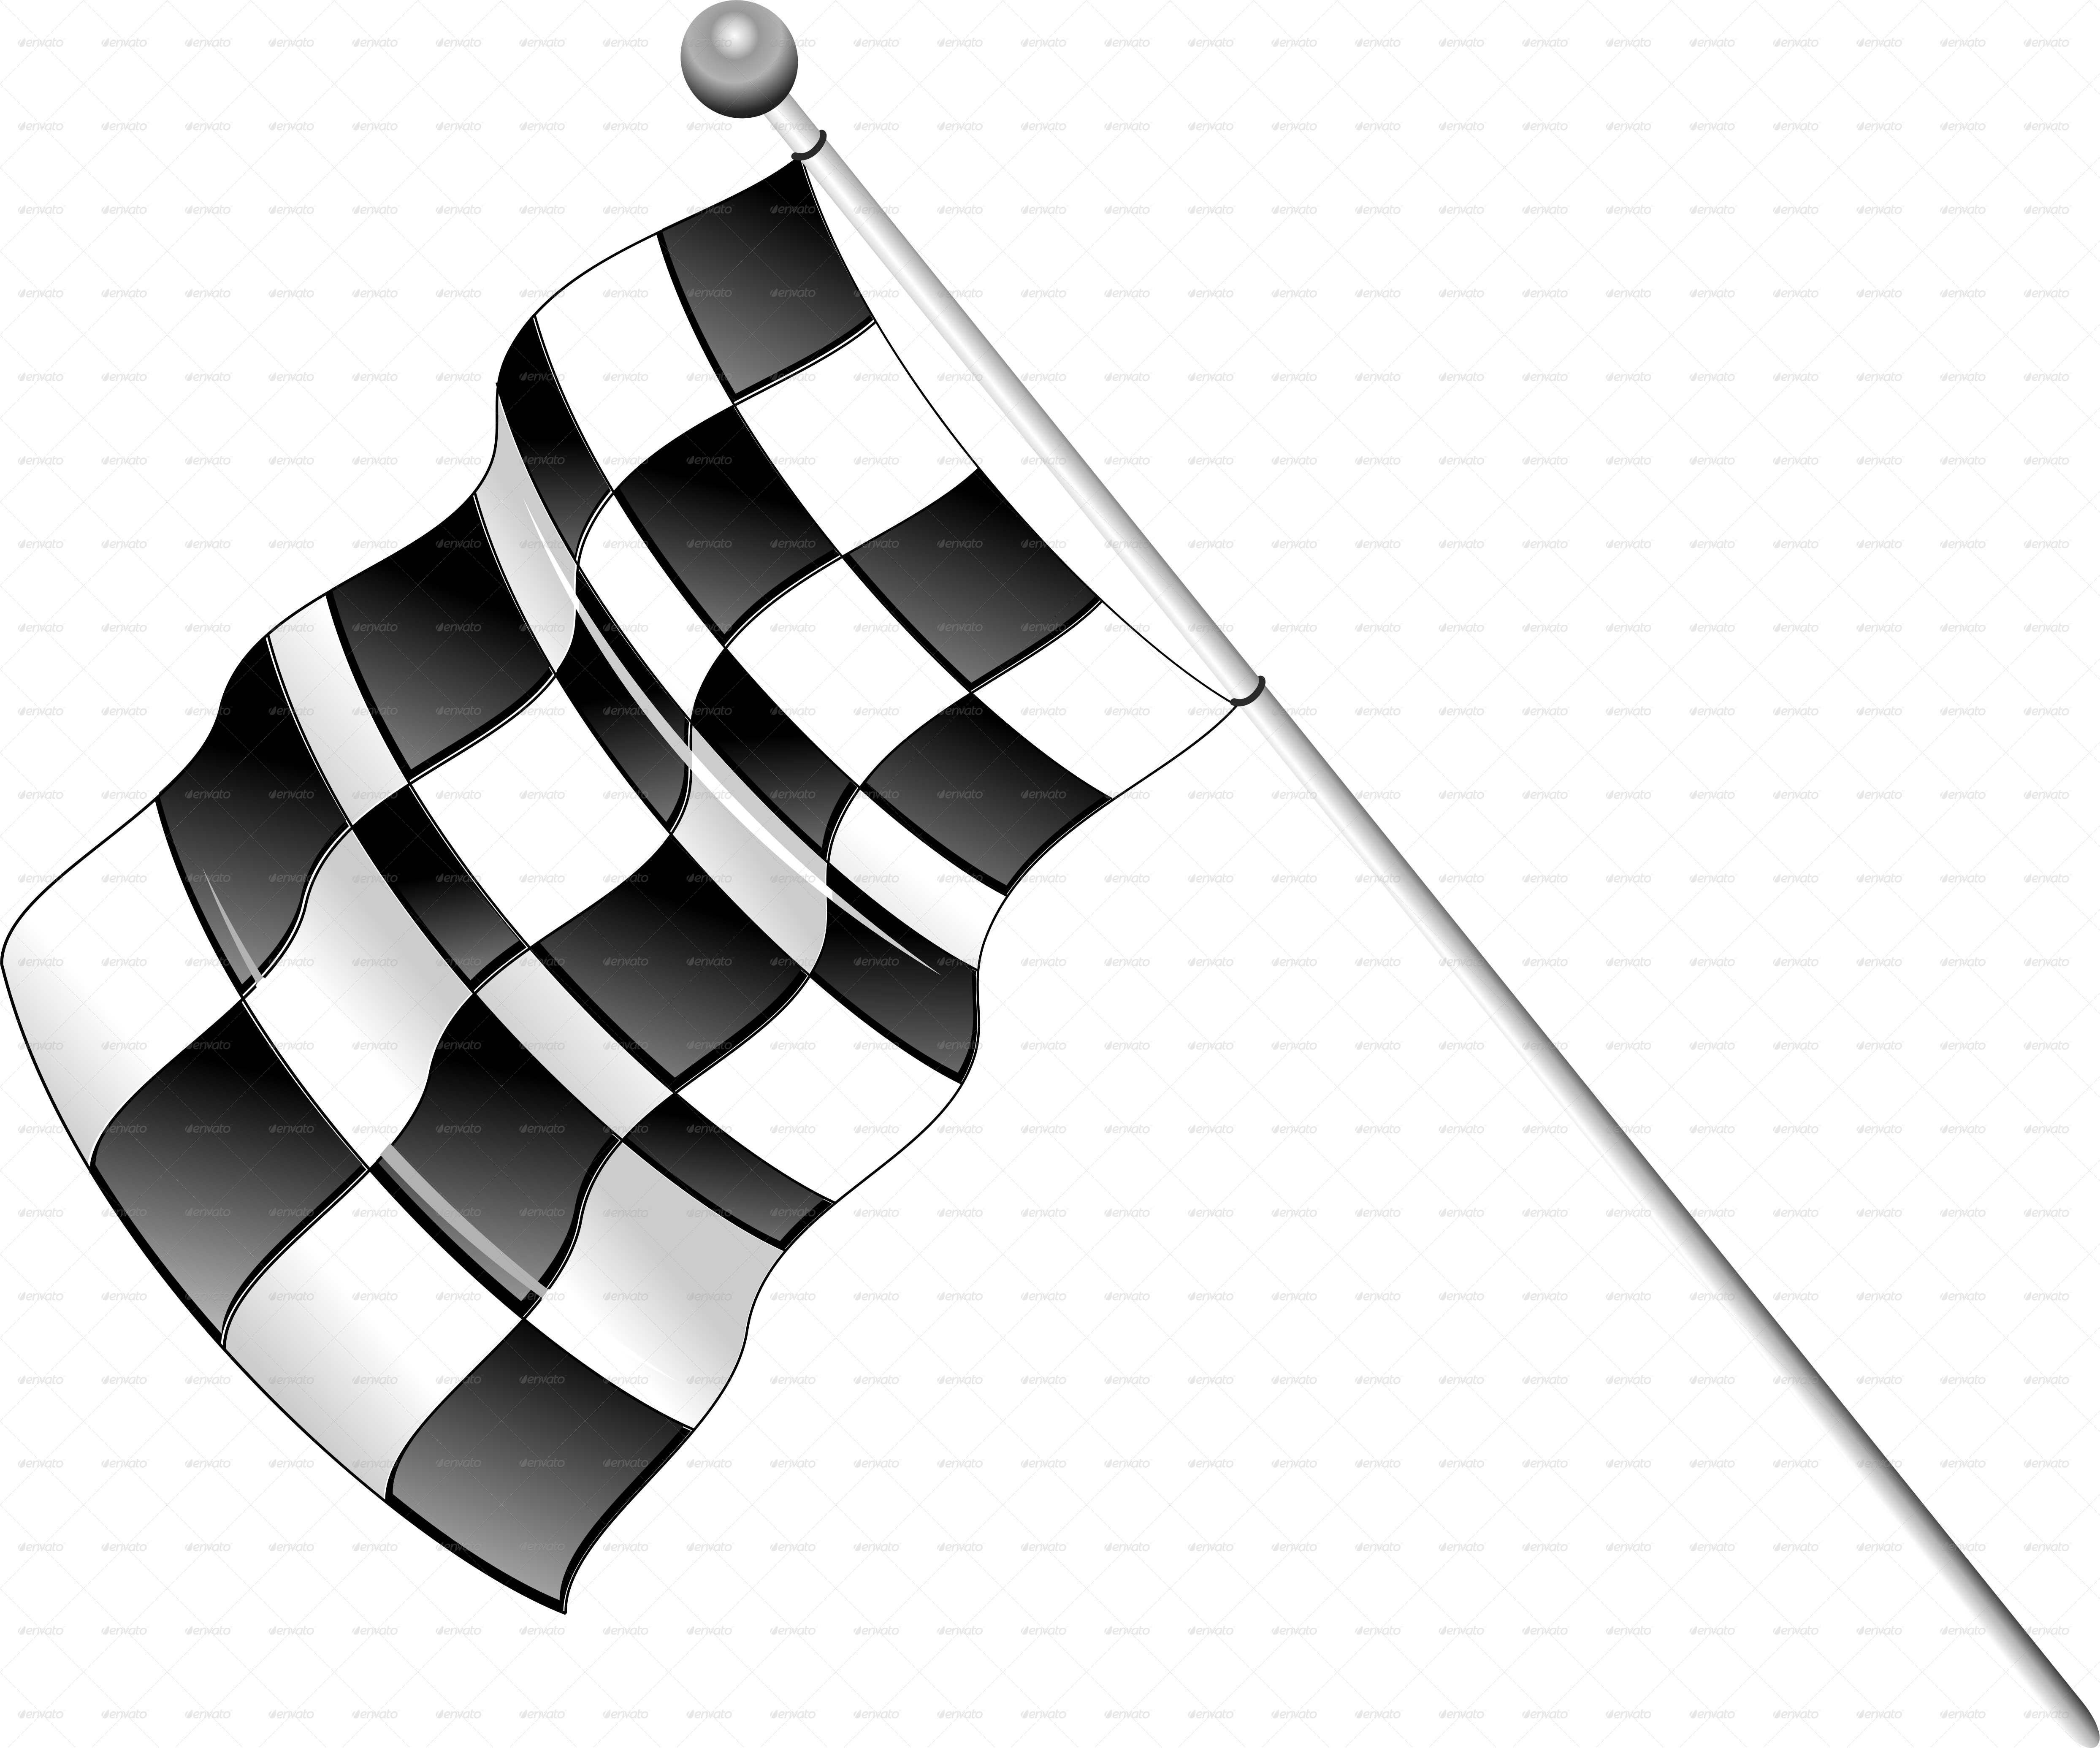 download checkered flag auto sales east